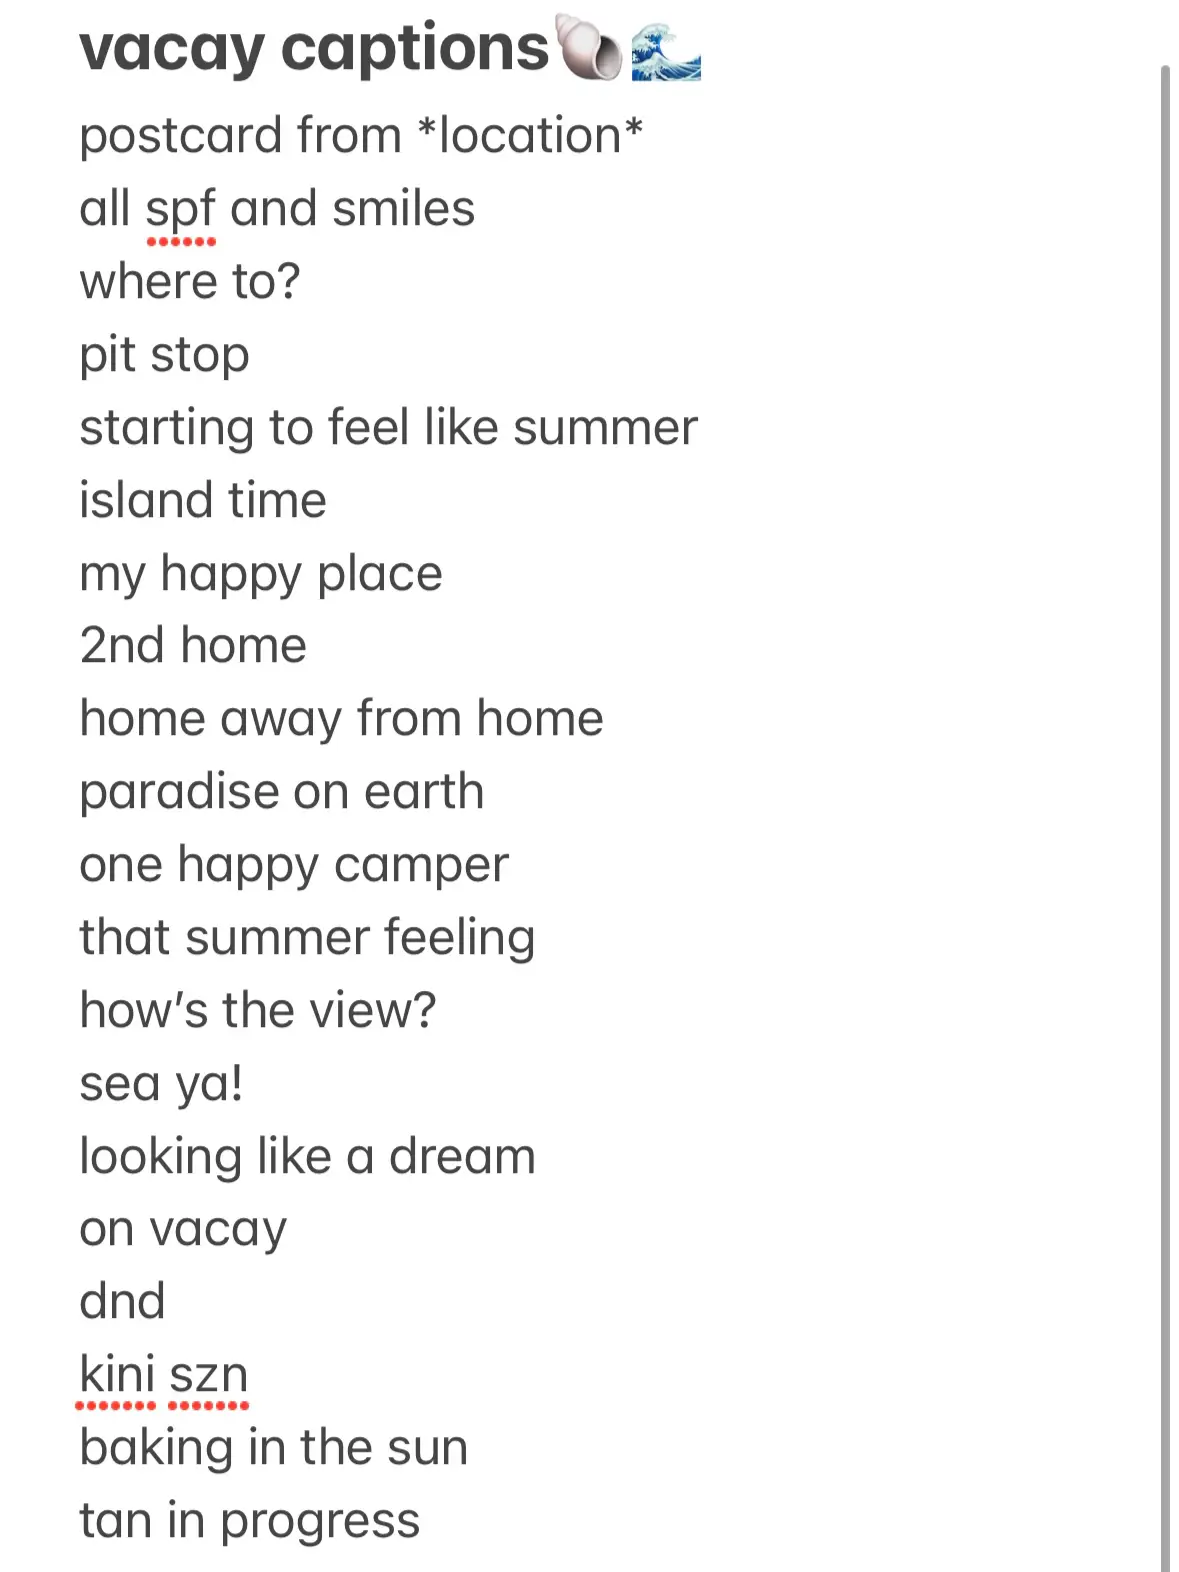  A list of words and phrases related to summer and travel.